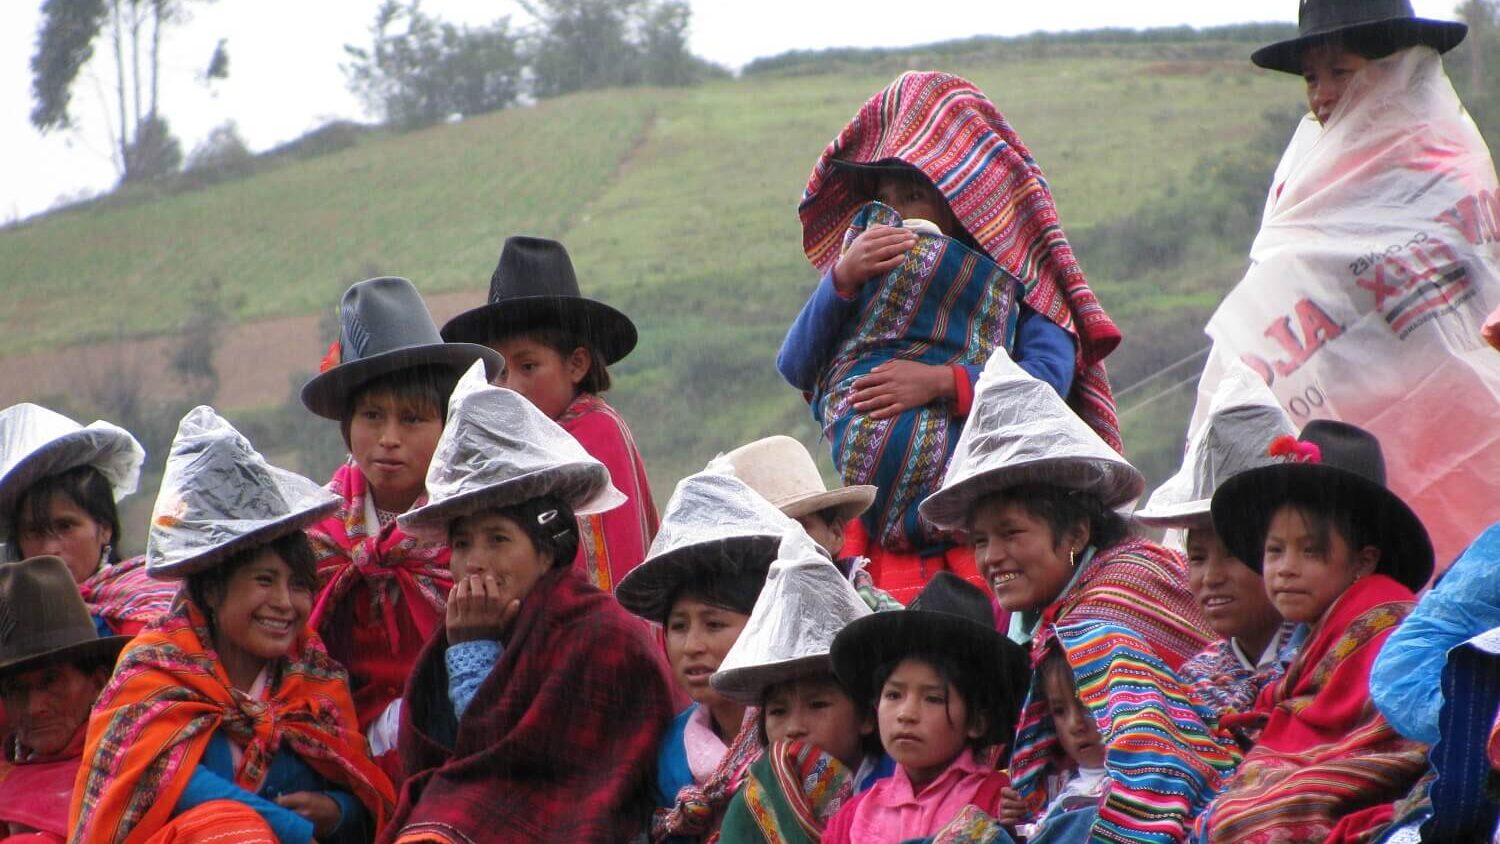 Local women and children protect themselves from the rain by putting a plastic bag on their hats and colorful ponchos around their shoulders.